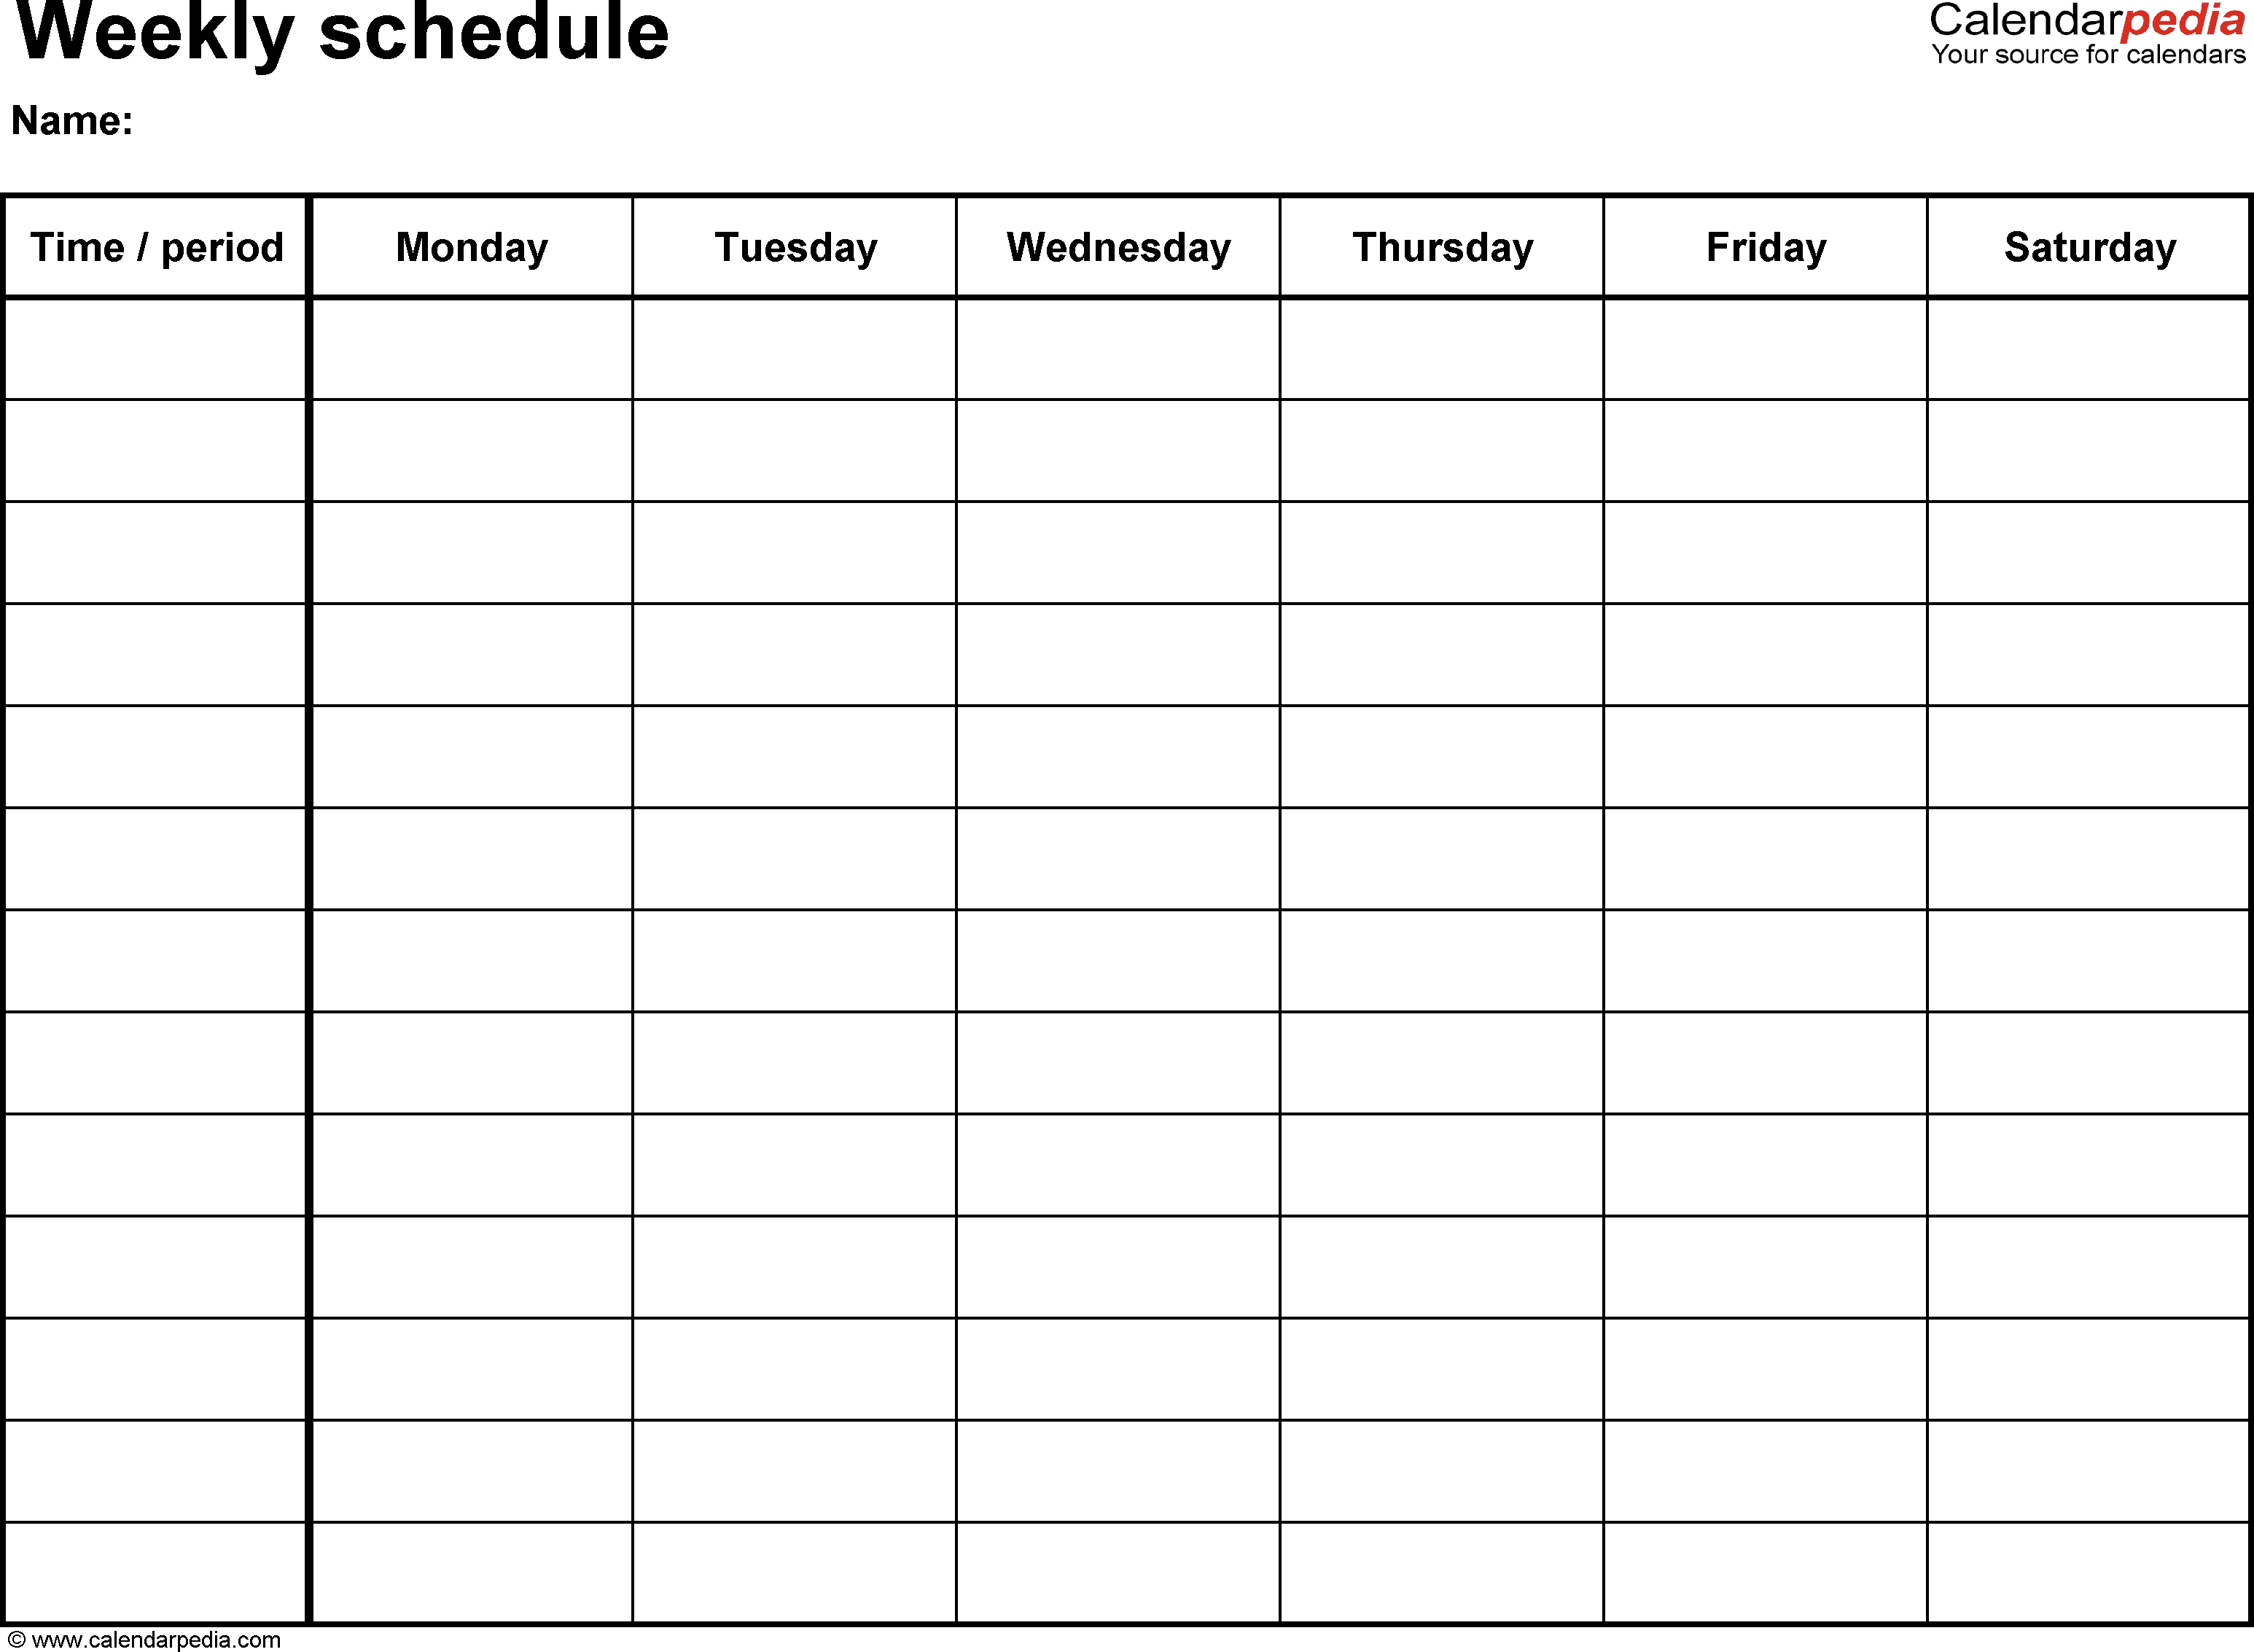 Free Weekly Schedule Templates For Pdf - 18 Templates with Weekly Schedule Template Free To Print